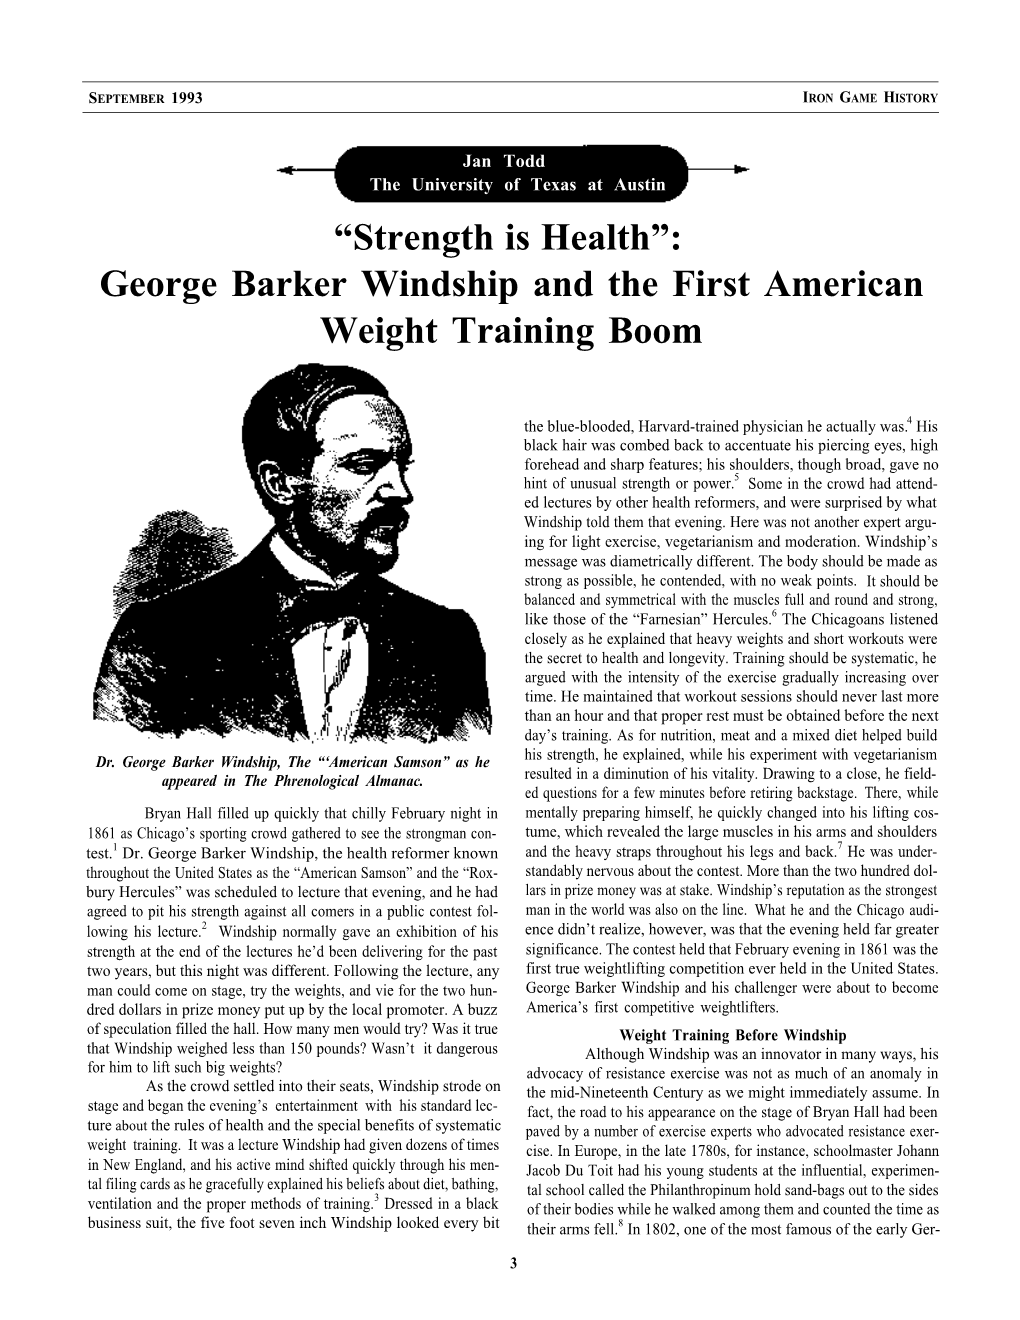 Strength Is Health: George Barker Windship and the First American Weight Training Boom